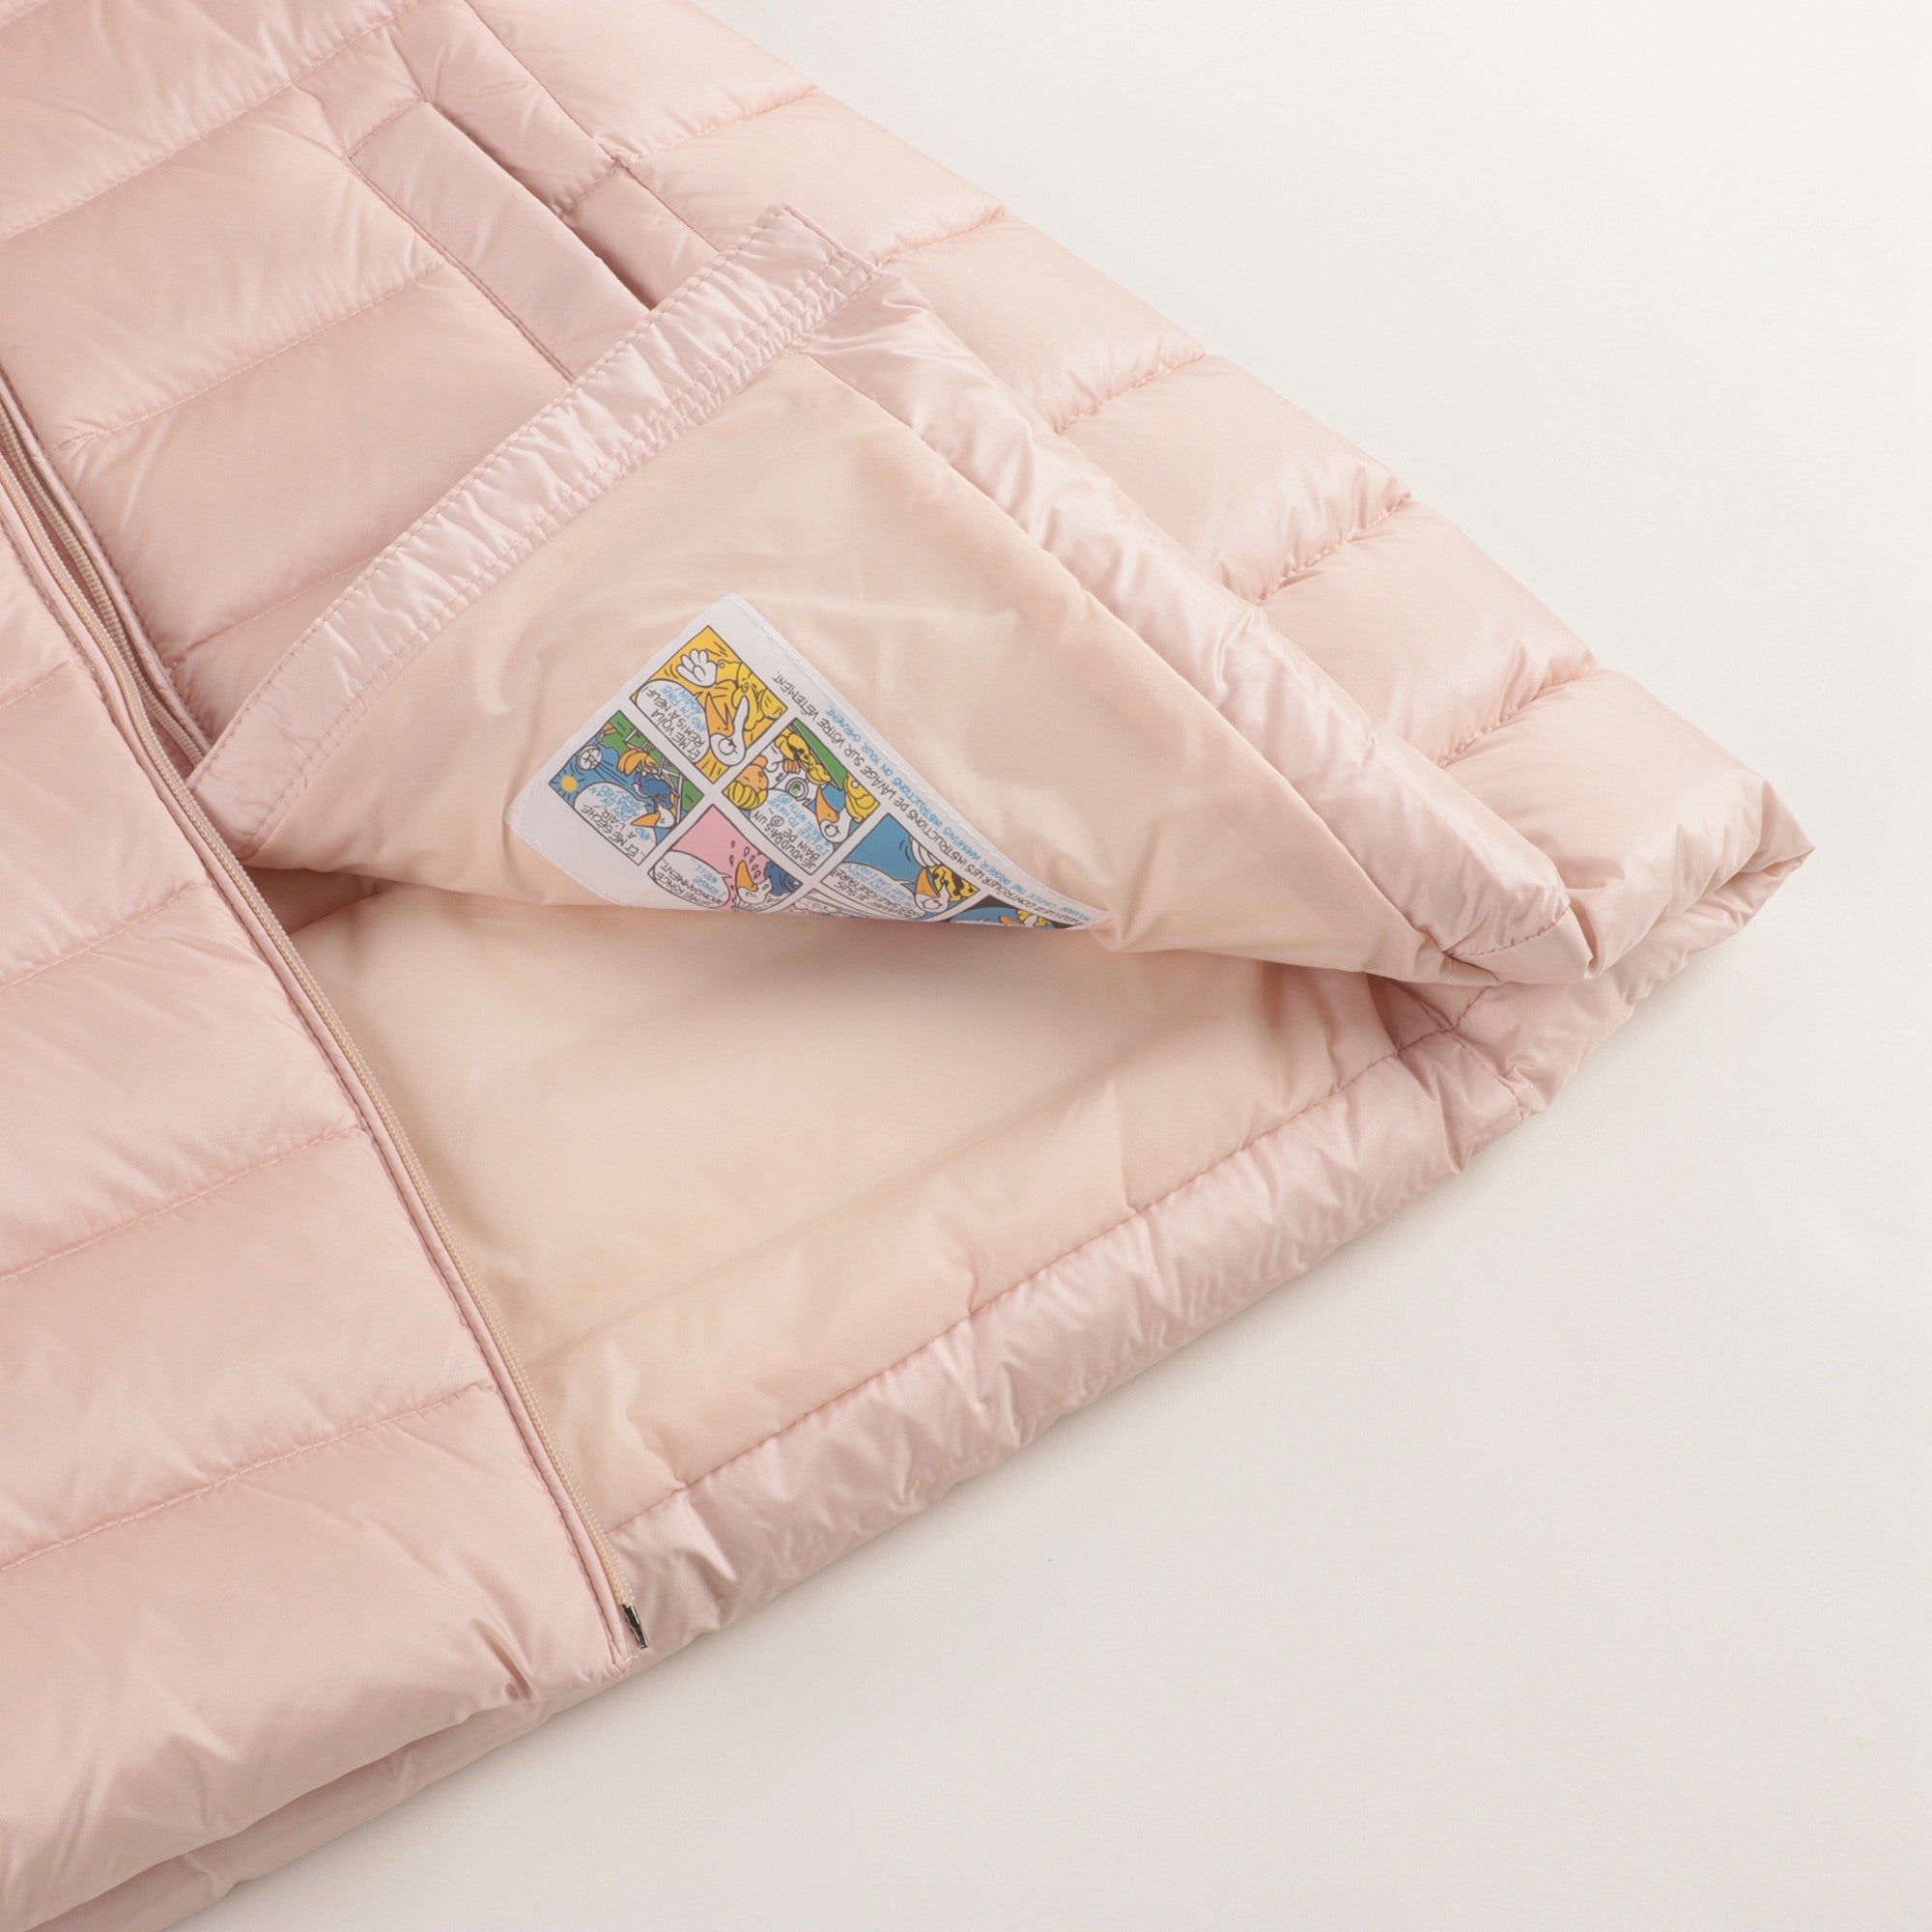 Baby Girls Pink "MAJEURE" Padded Down Coat